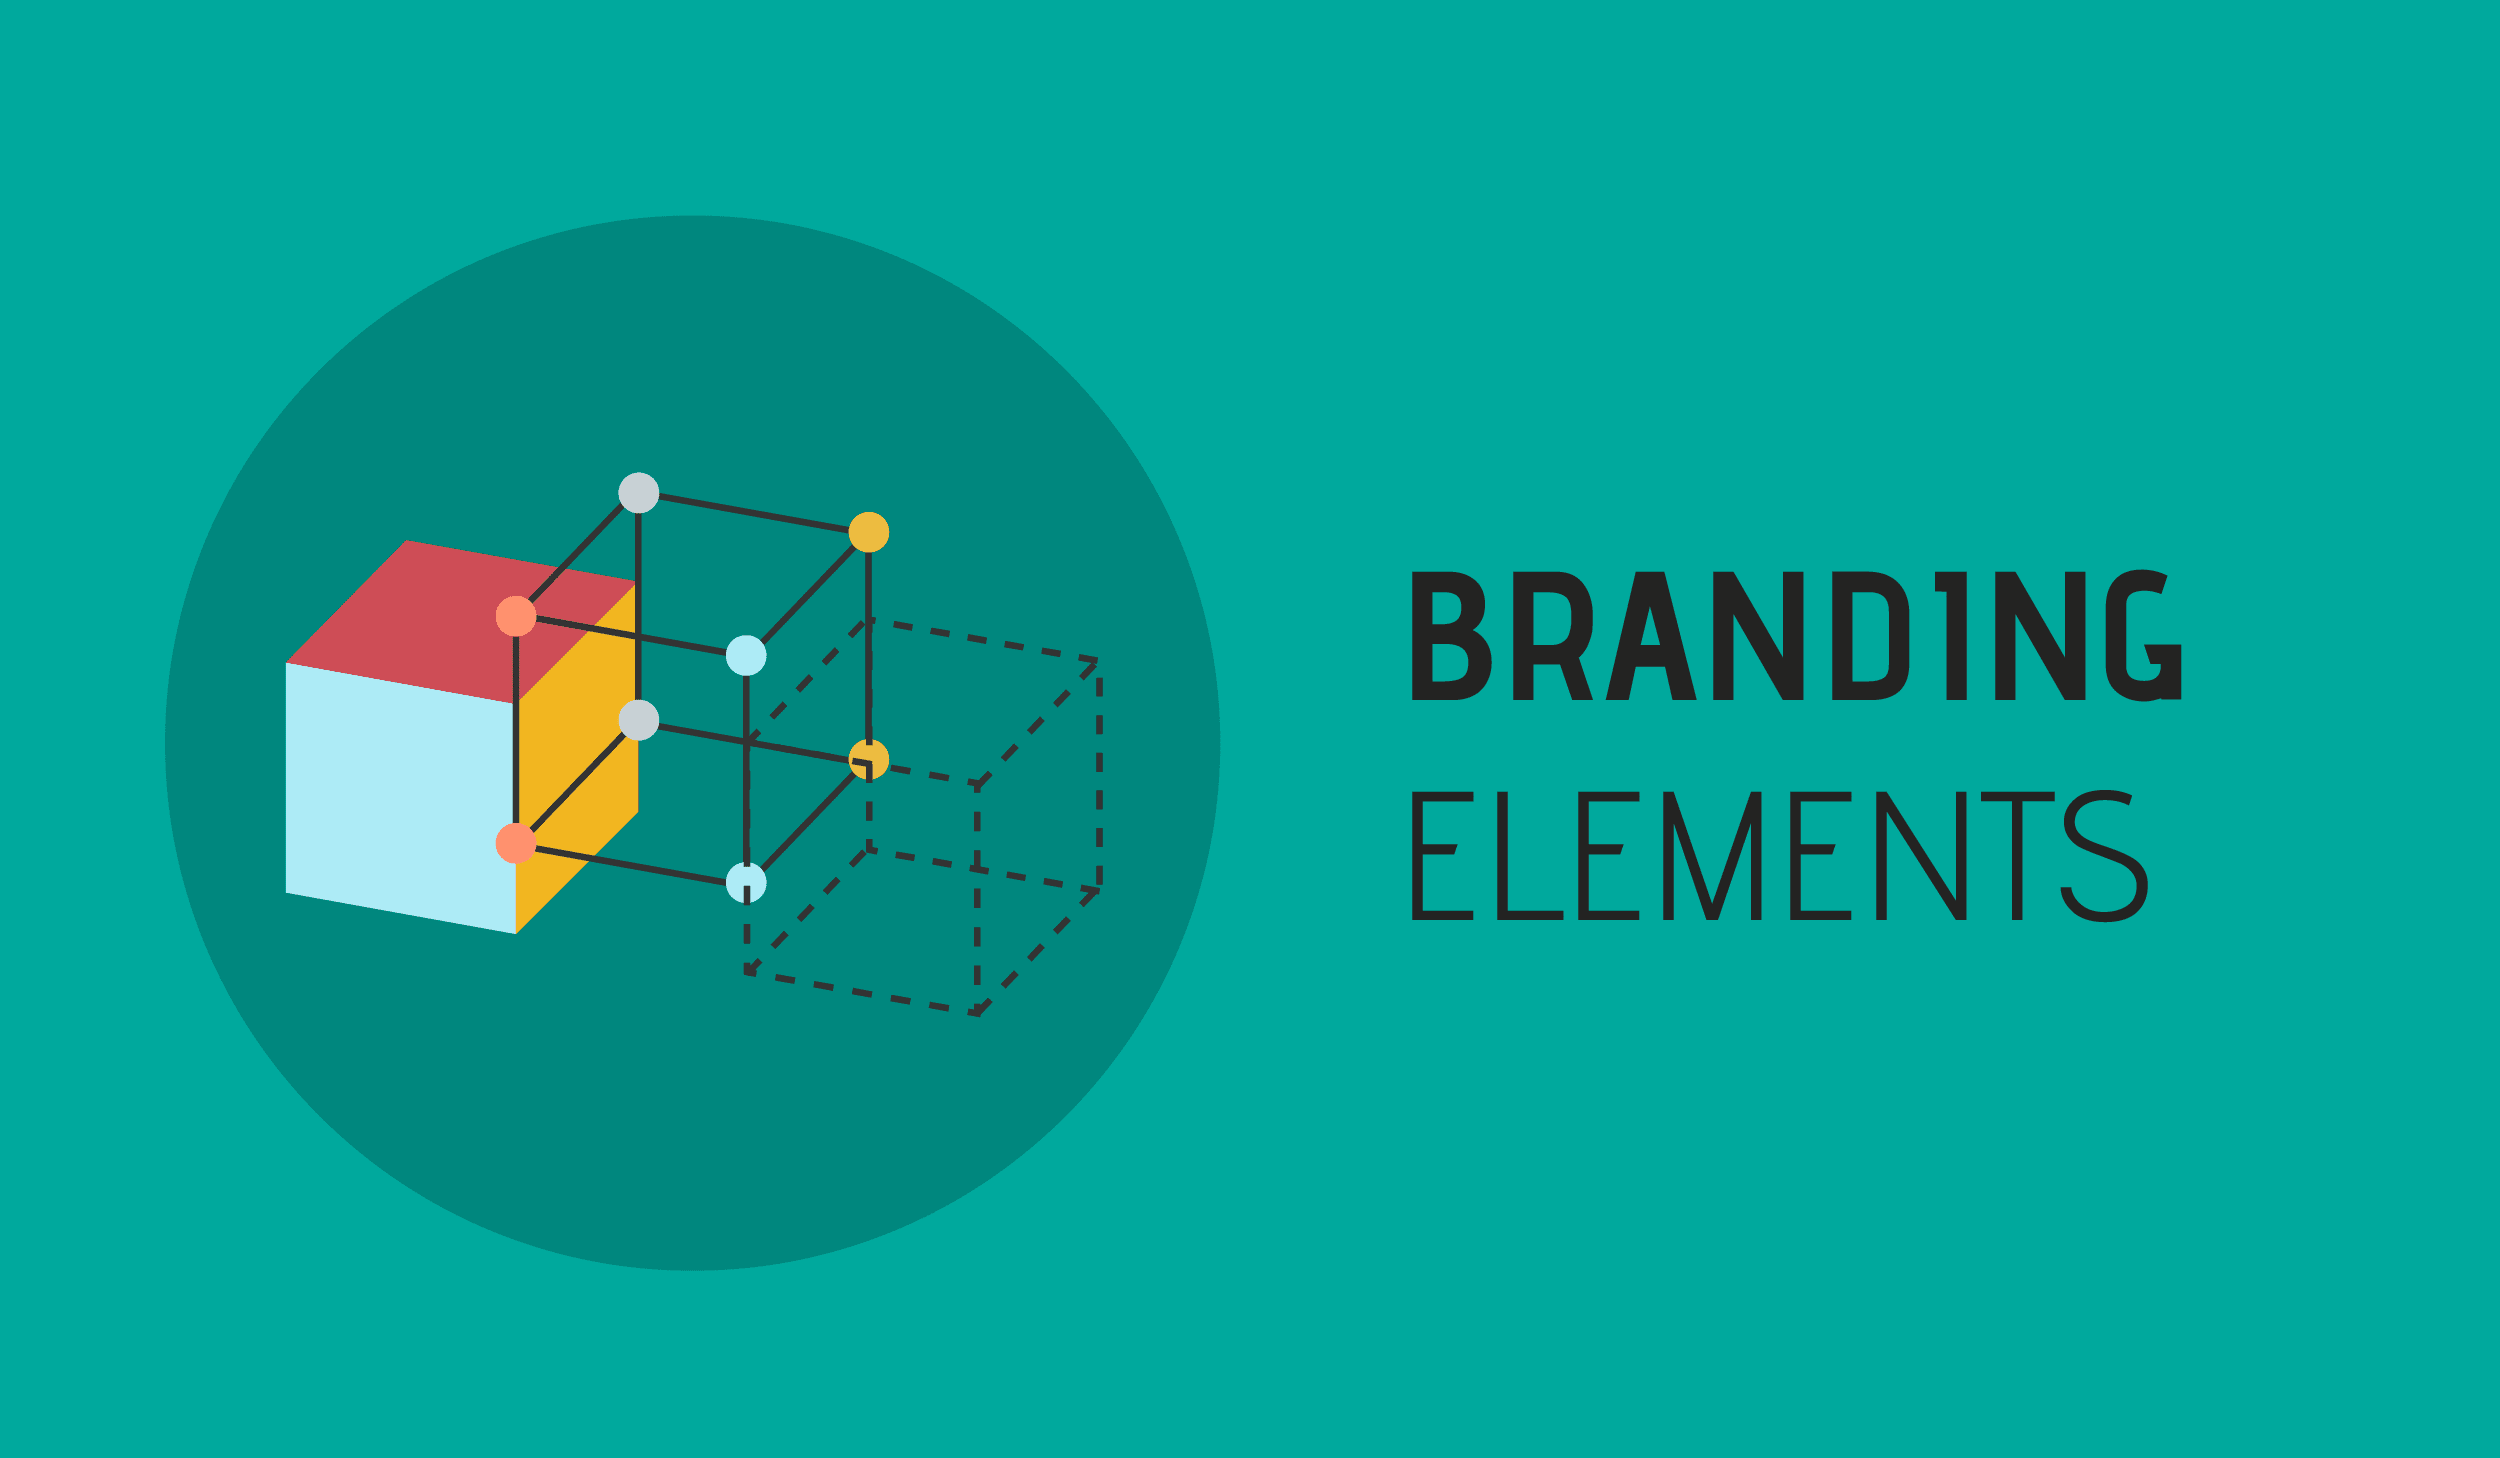 There are several elements that form a brand. A Branding Elements Cover Photo.